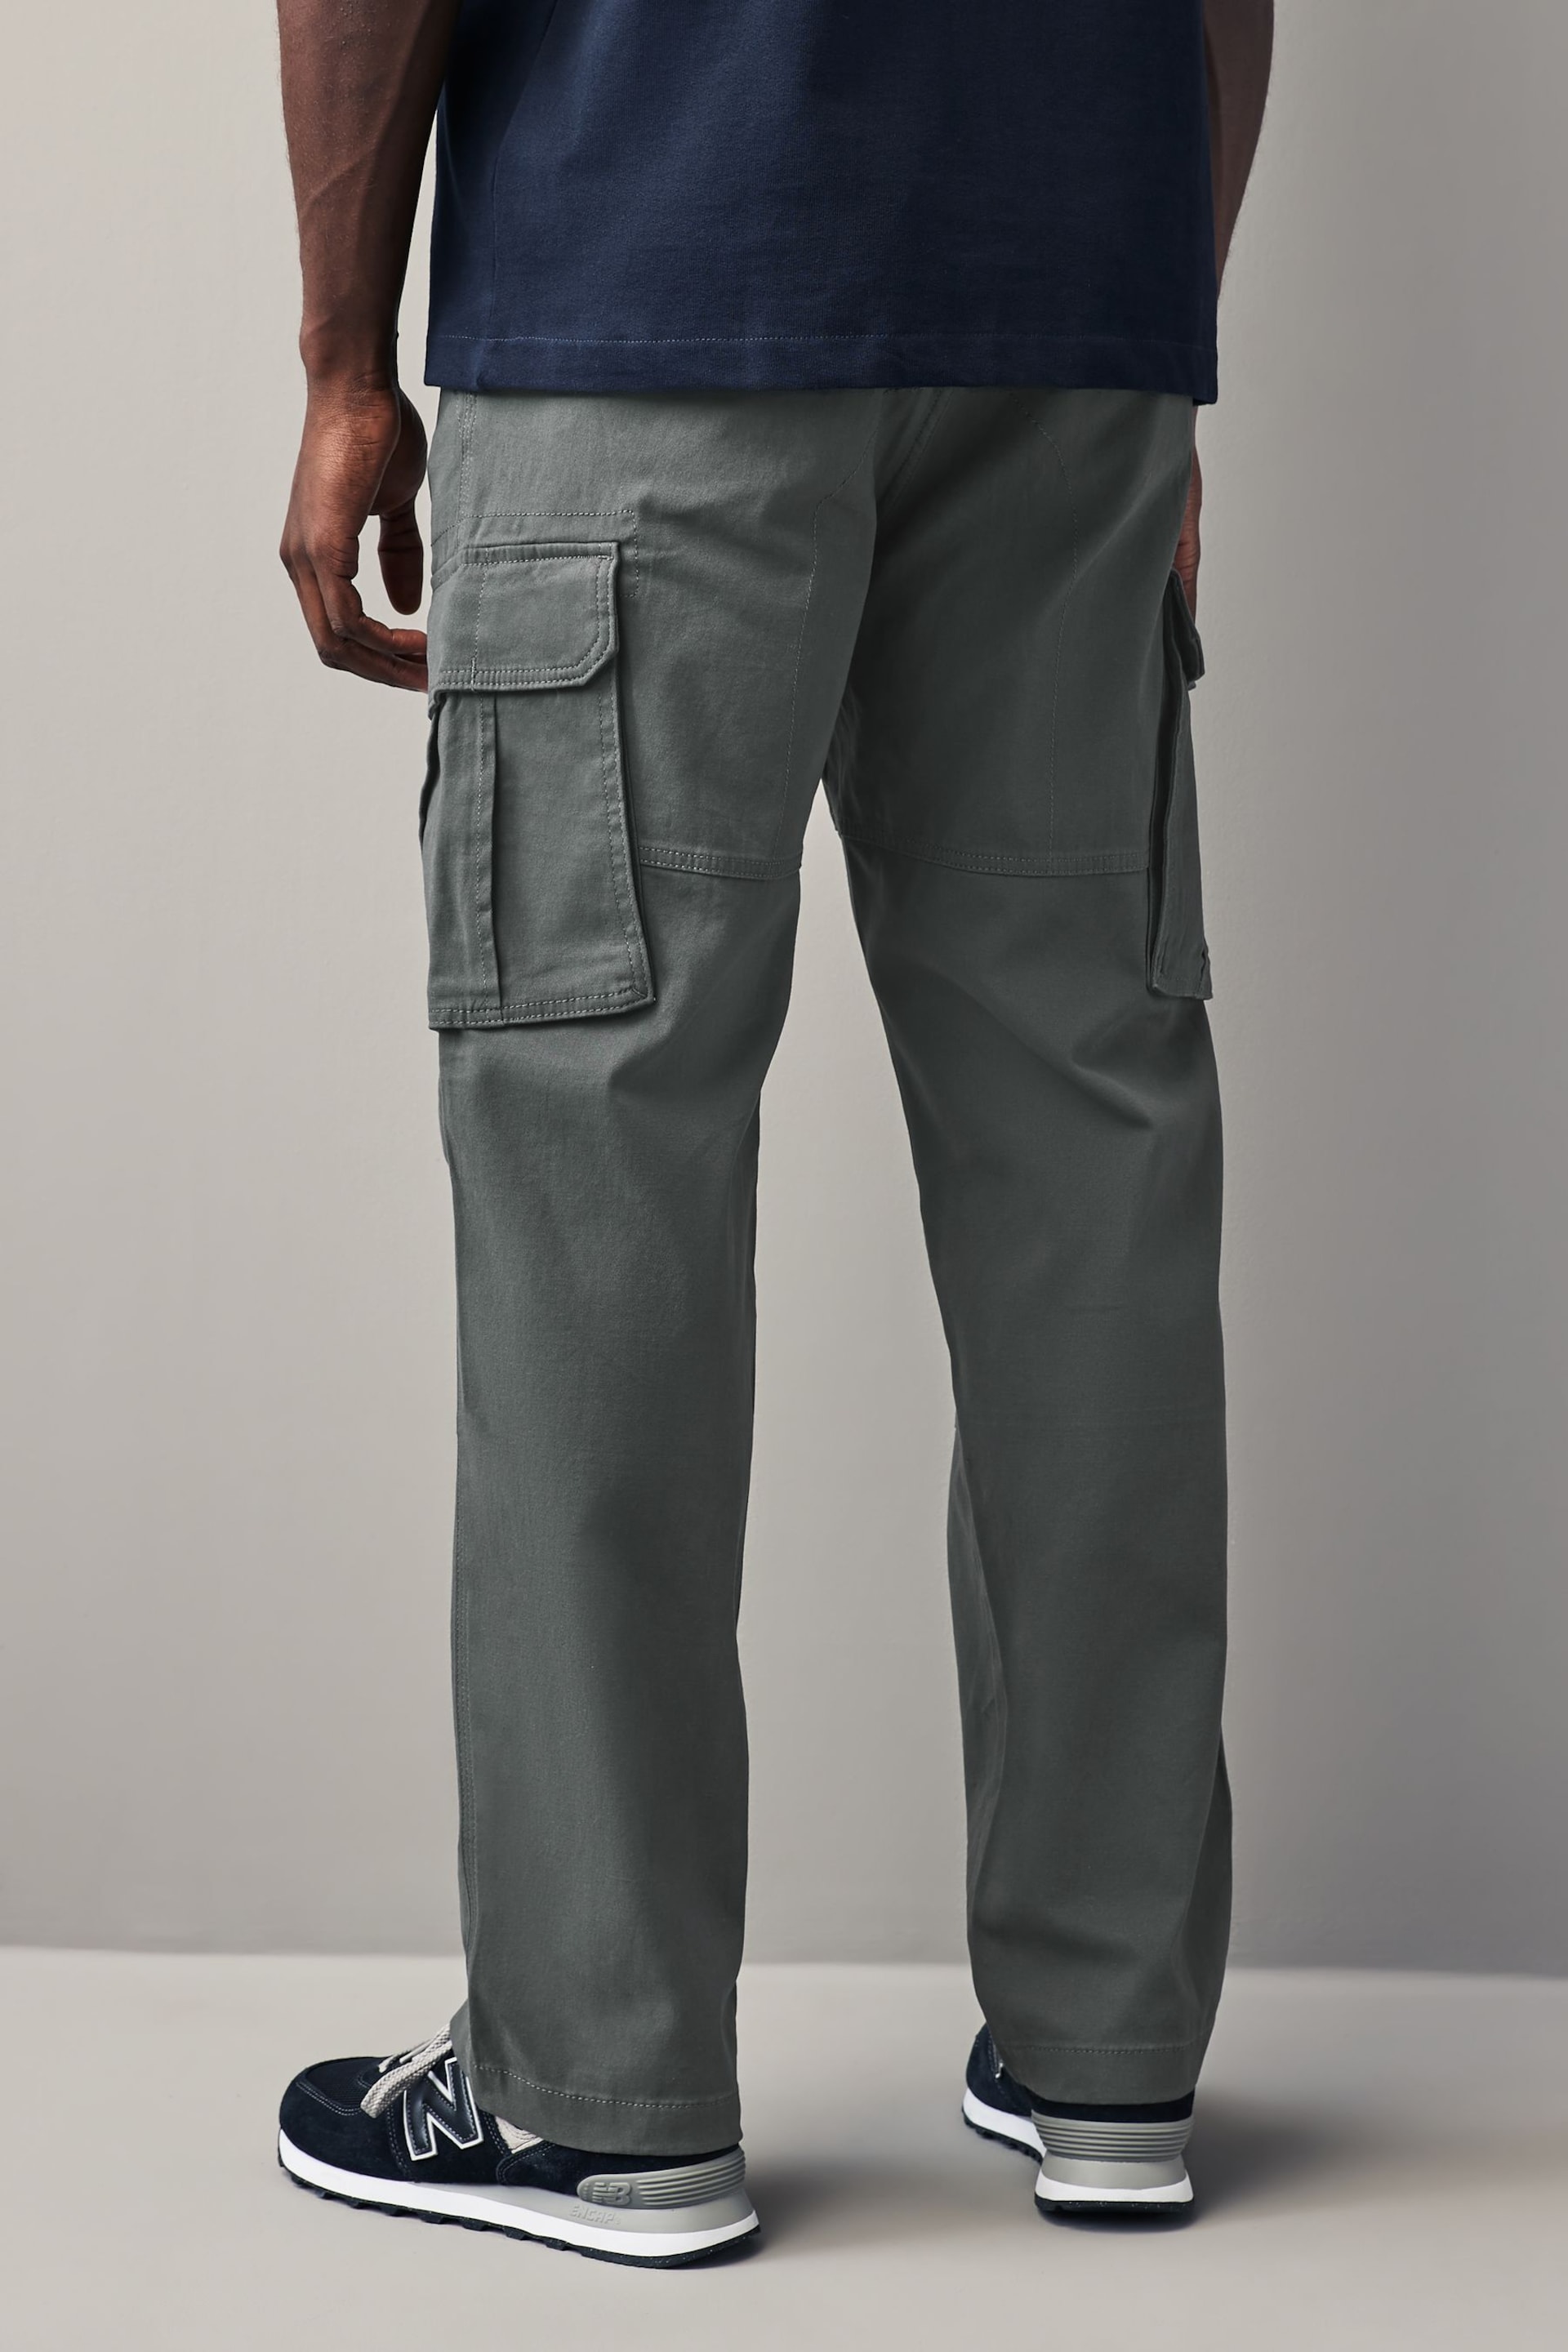 Black/Charcoal Grey Straight Cotton Rich Stretch Cargo Trousers 2 Pack - Image 4 of 13